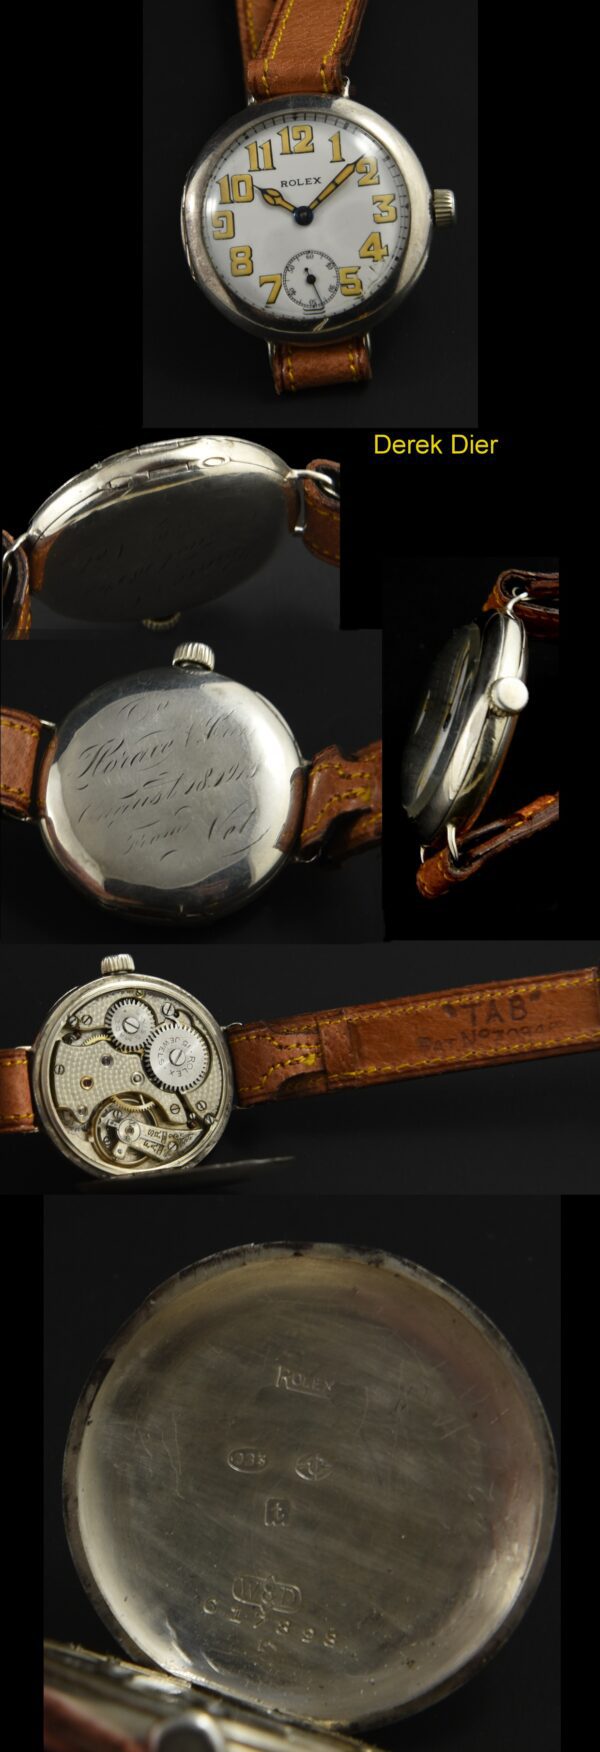 1914 Rolex sterling silver WW1-era trench watch with original hinged case, porcelain dial, hands, and recently cleaned, signed movement.